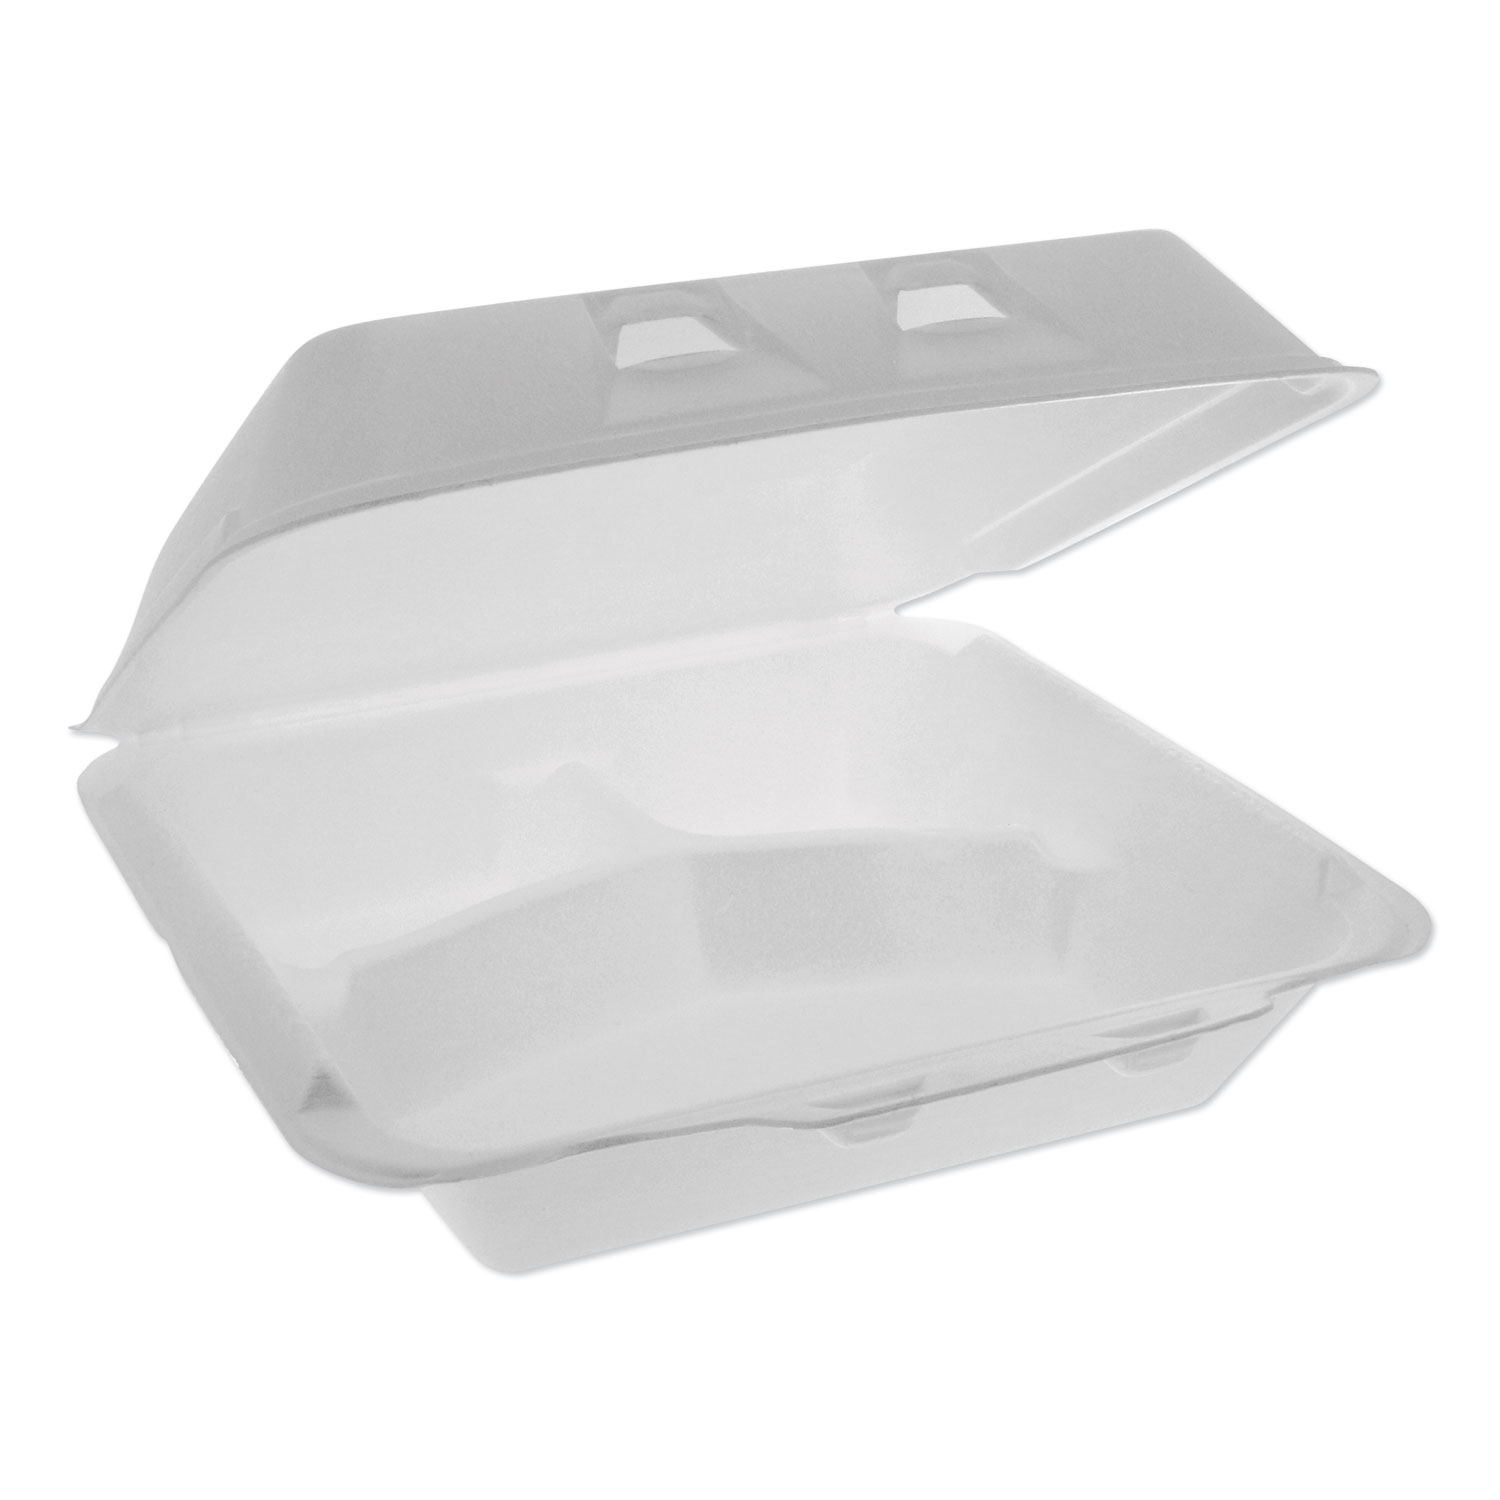  Pactiv YHLW09030000 SmartLock Vented Foam Hinged Lid Containers, White, 9 x 9.5 x 3.25, 3-Compartment, 150/Carton (PCTYHLW0903) 